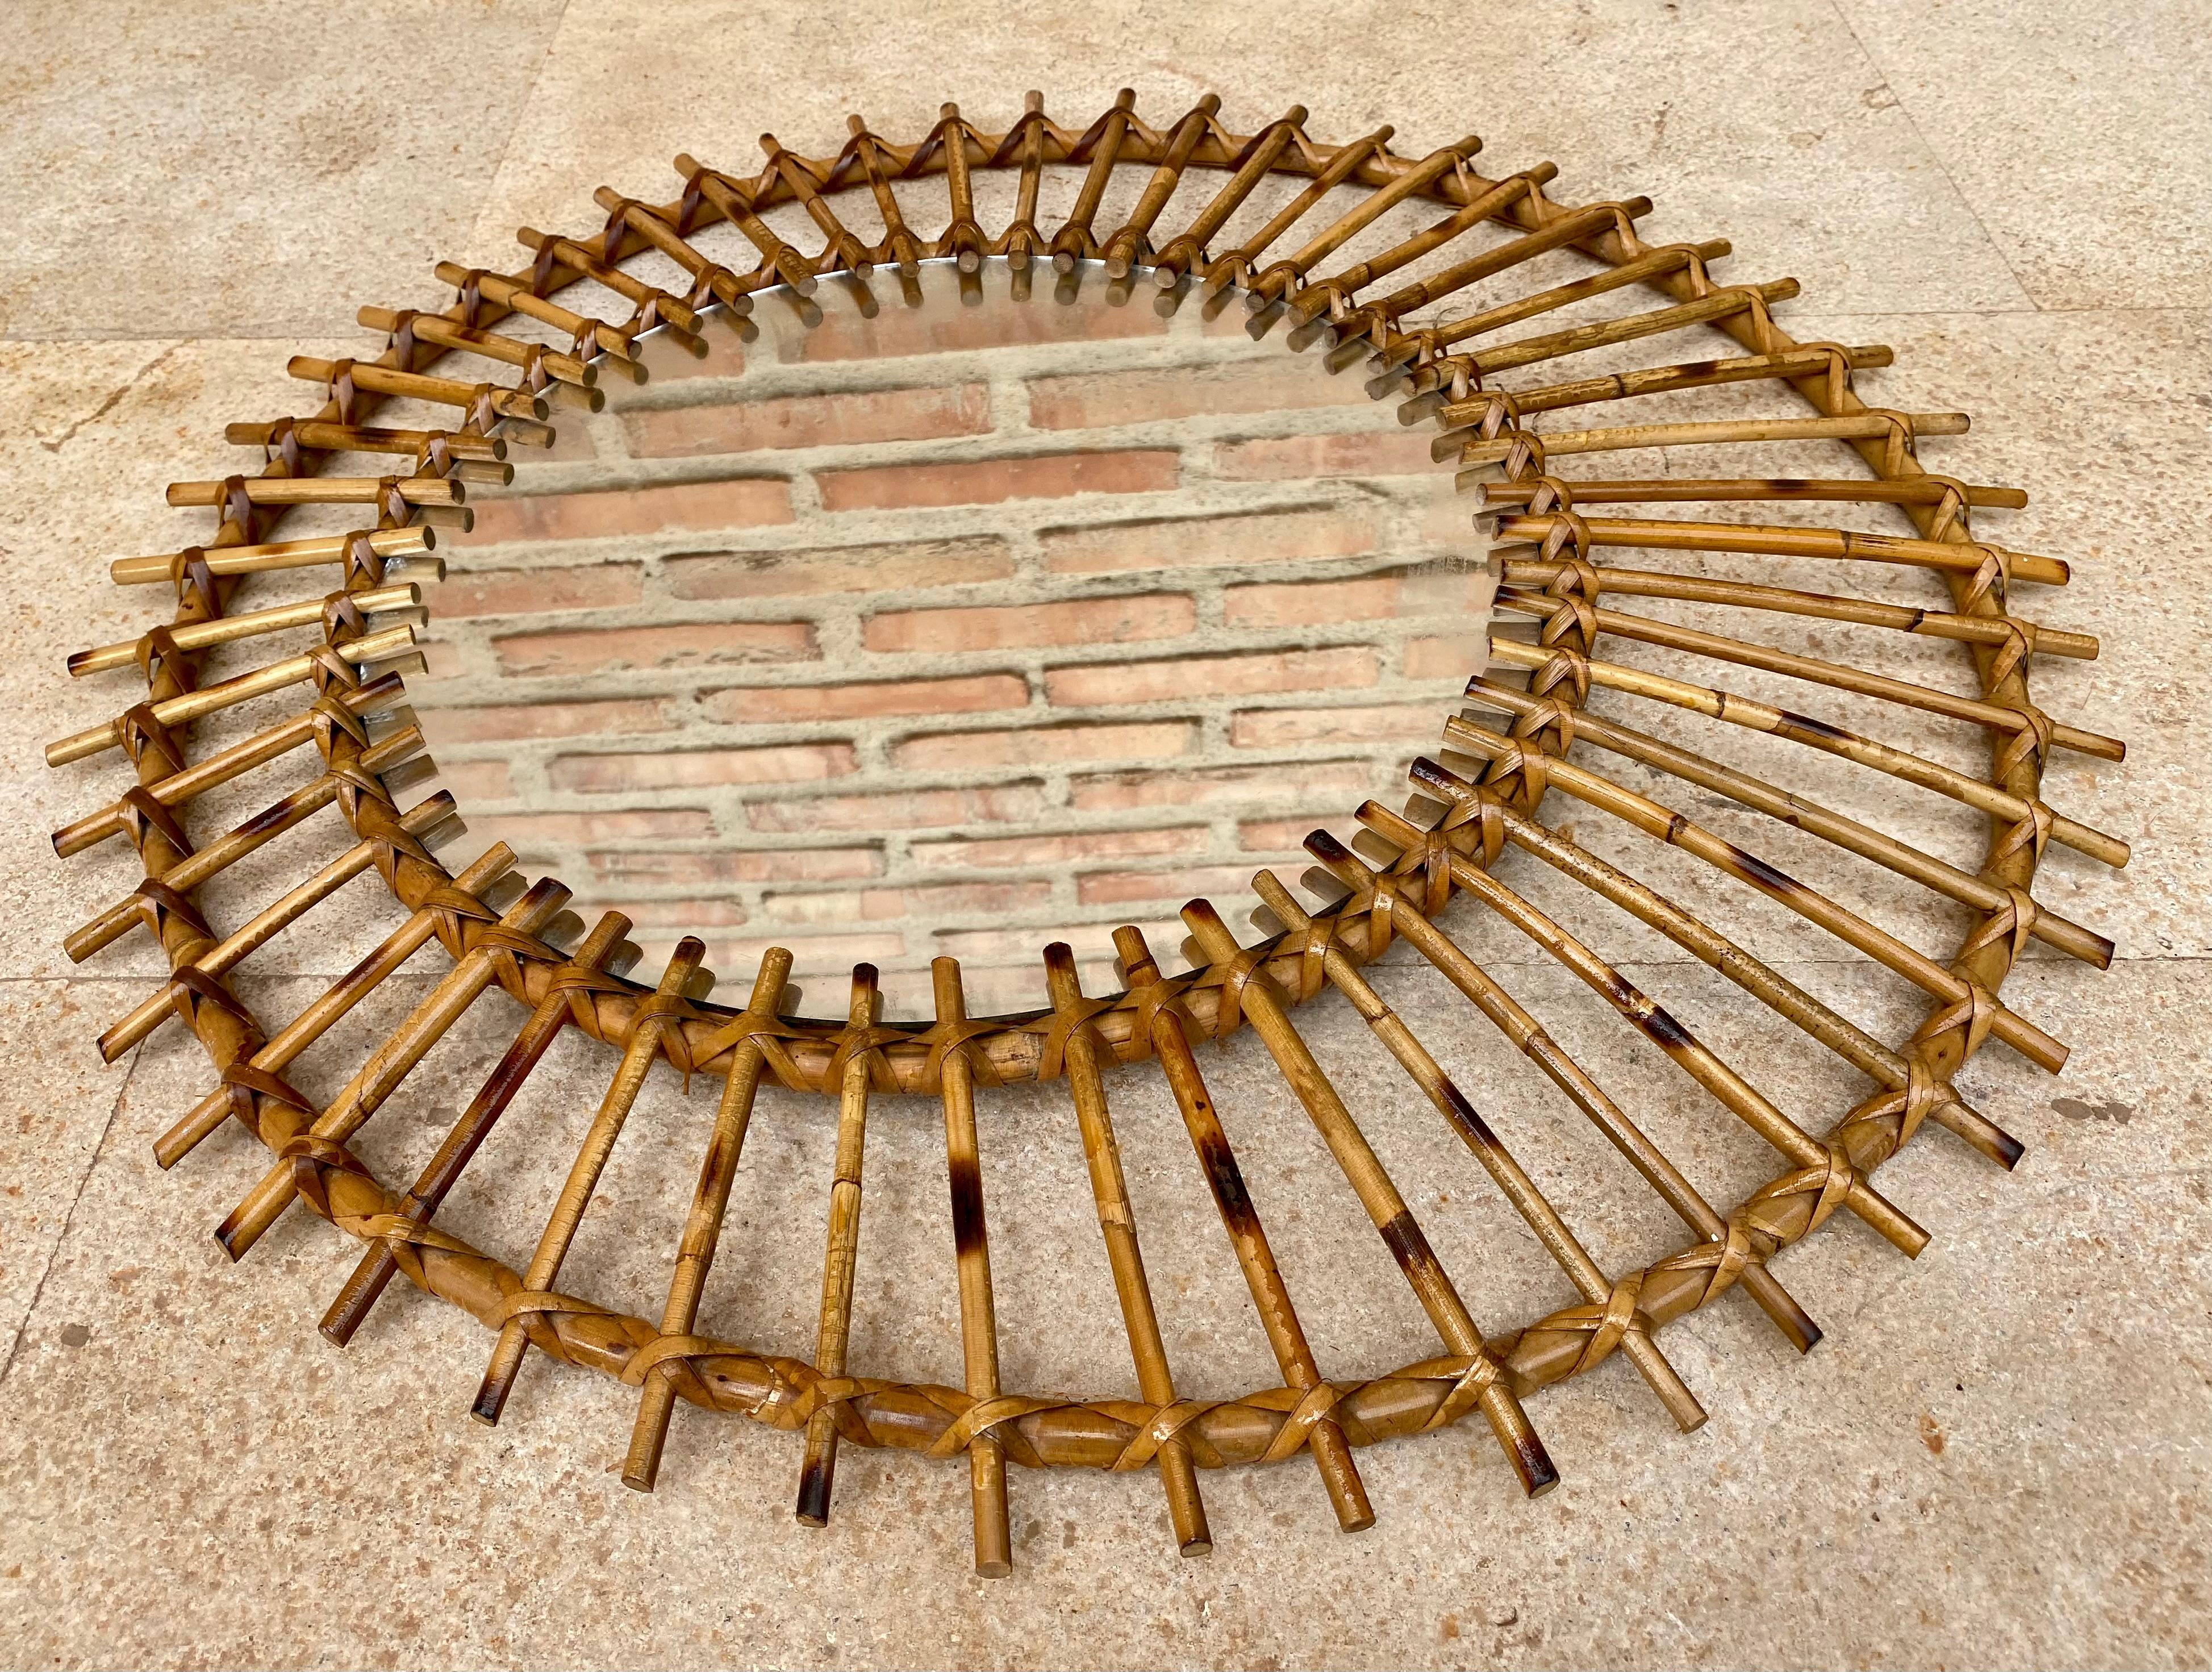 Beautiful Mid-Century Modern Mediterranean Wicker Mirror and Rattan Flower or Sunburst Mirror. Spain, 60s. 
This mirror was handcrafted in Spain in the sixties. It has all the freshness of the Mediterranean flavor and will be a good complement in a